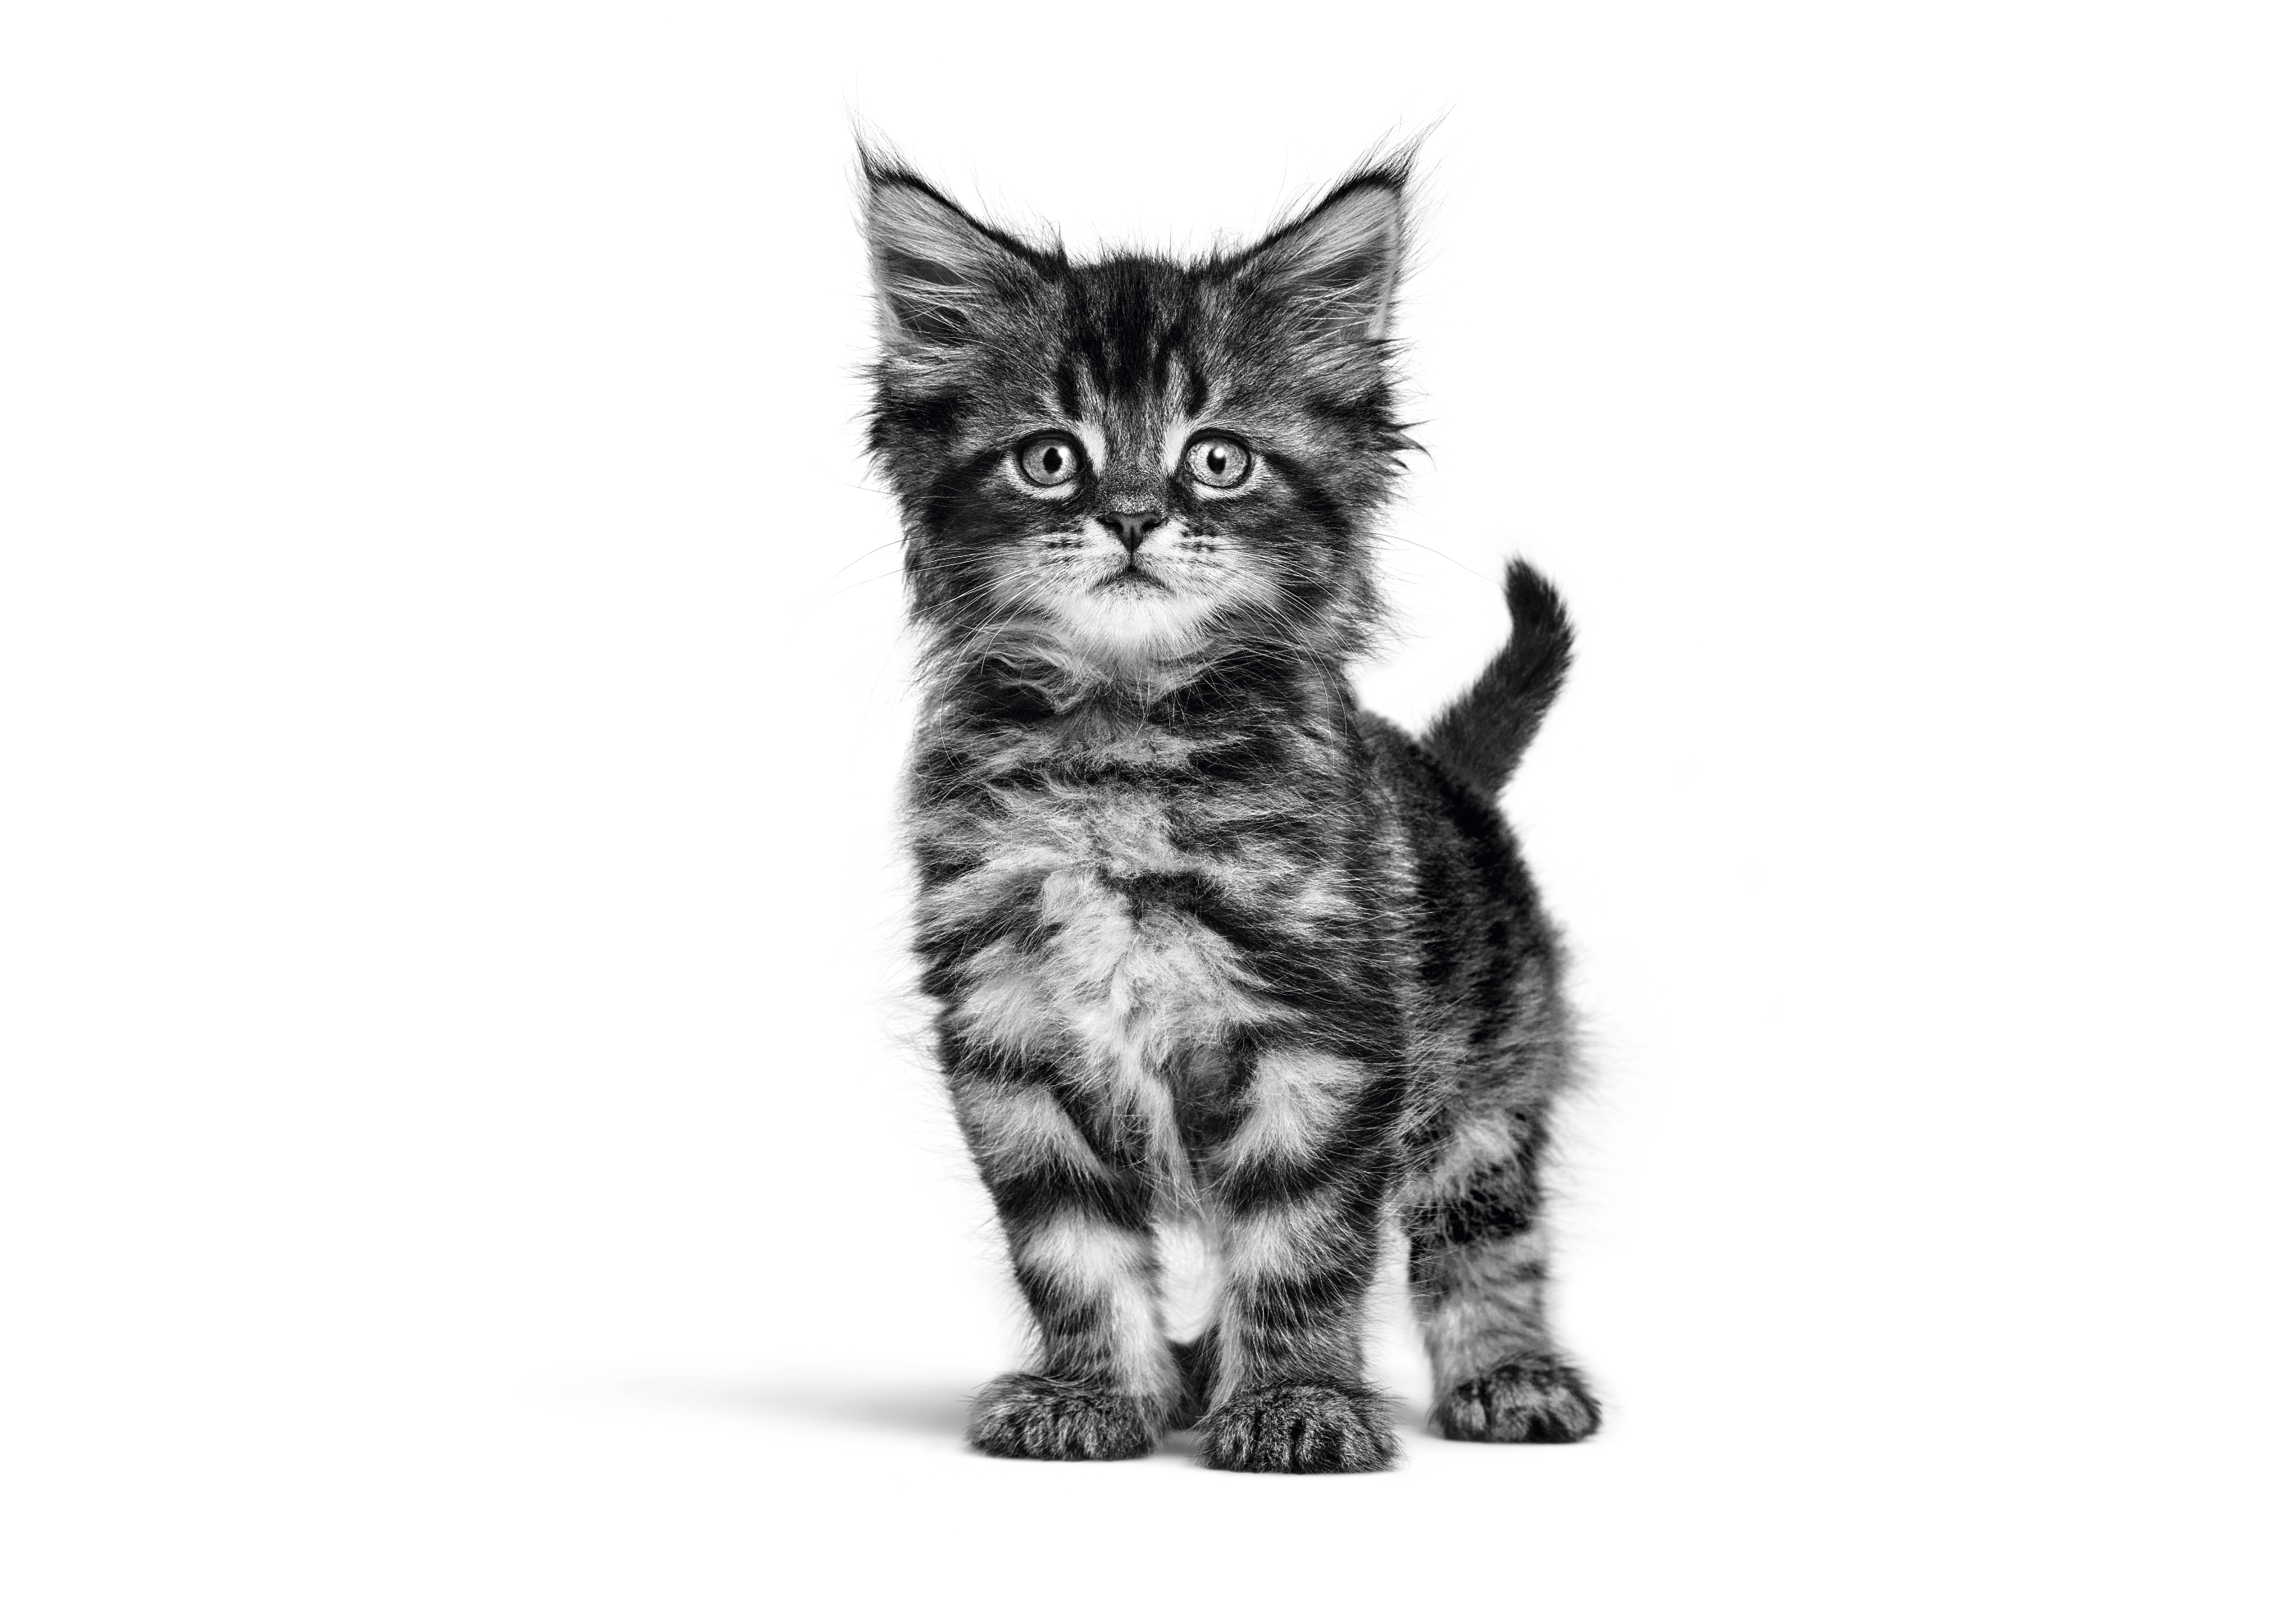 Black and white Maine Coon kitten standing